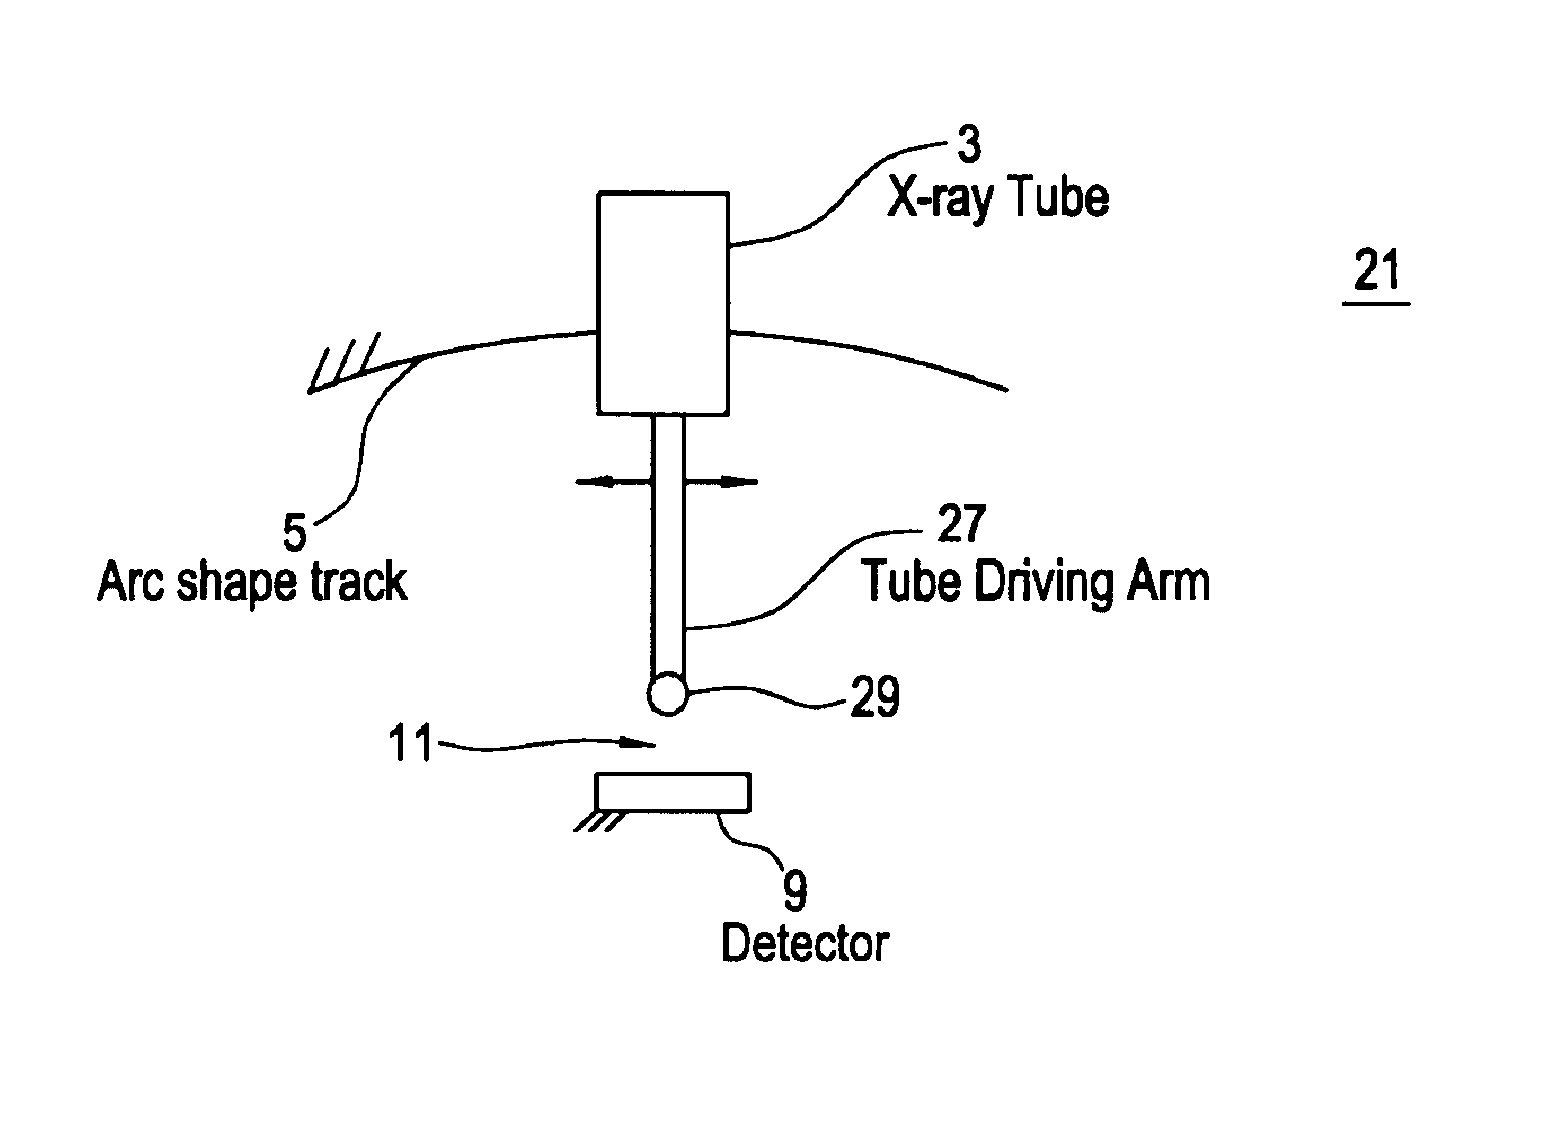 Tomosynthesis X-ray mammogram system and method with automatic drive system